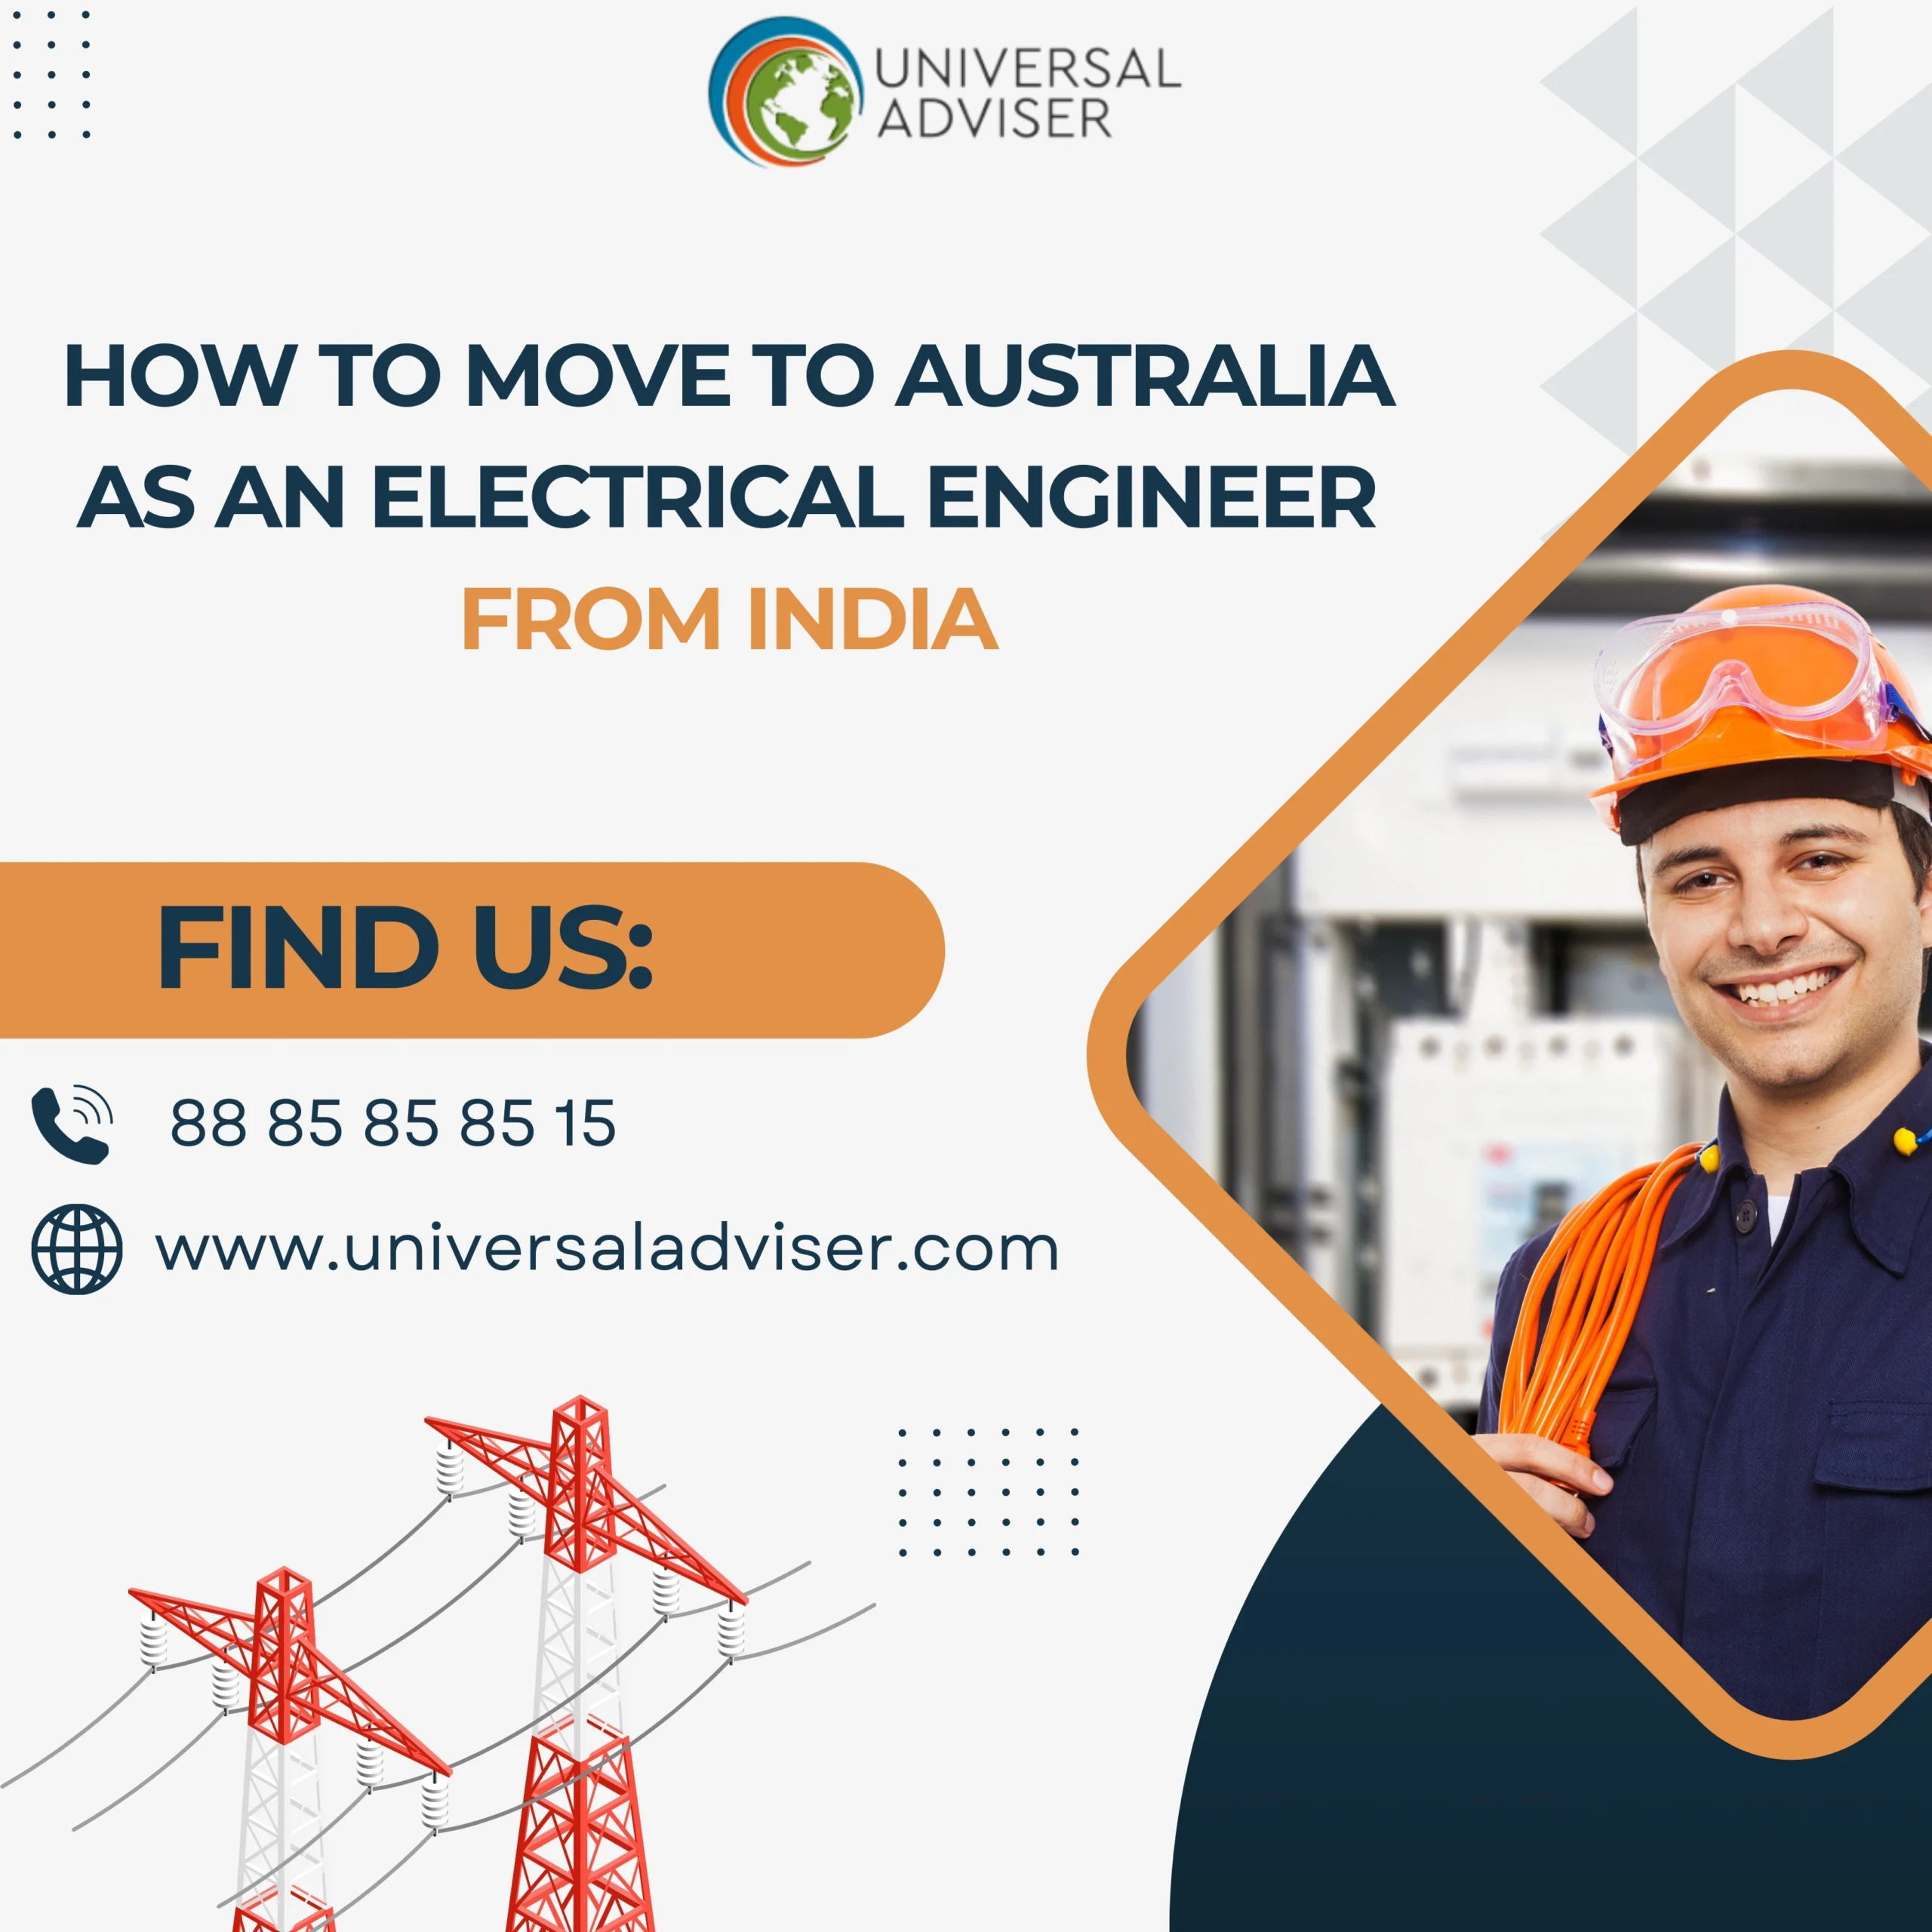 How to Move to Australia as an Electrical Engineer from India